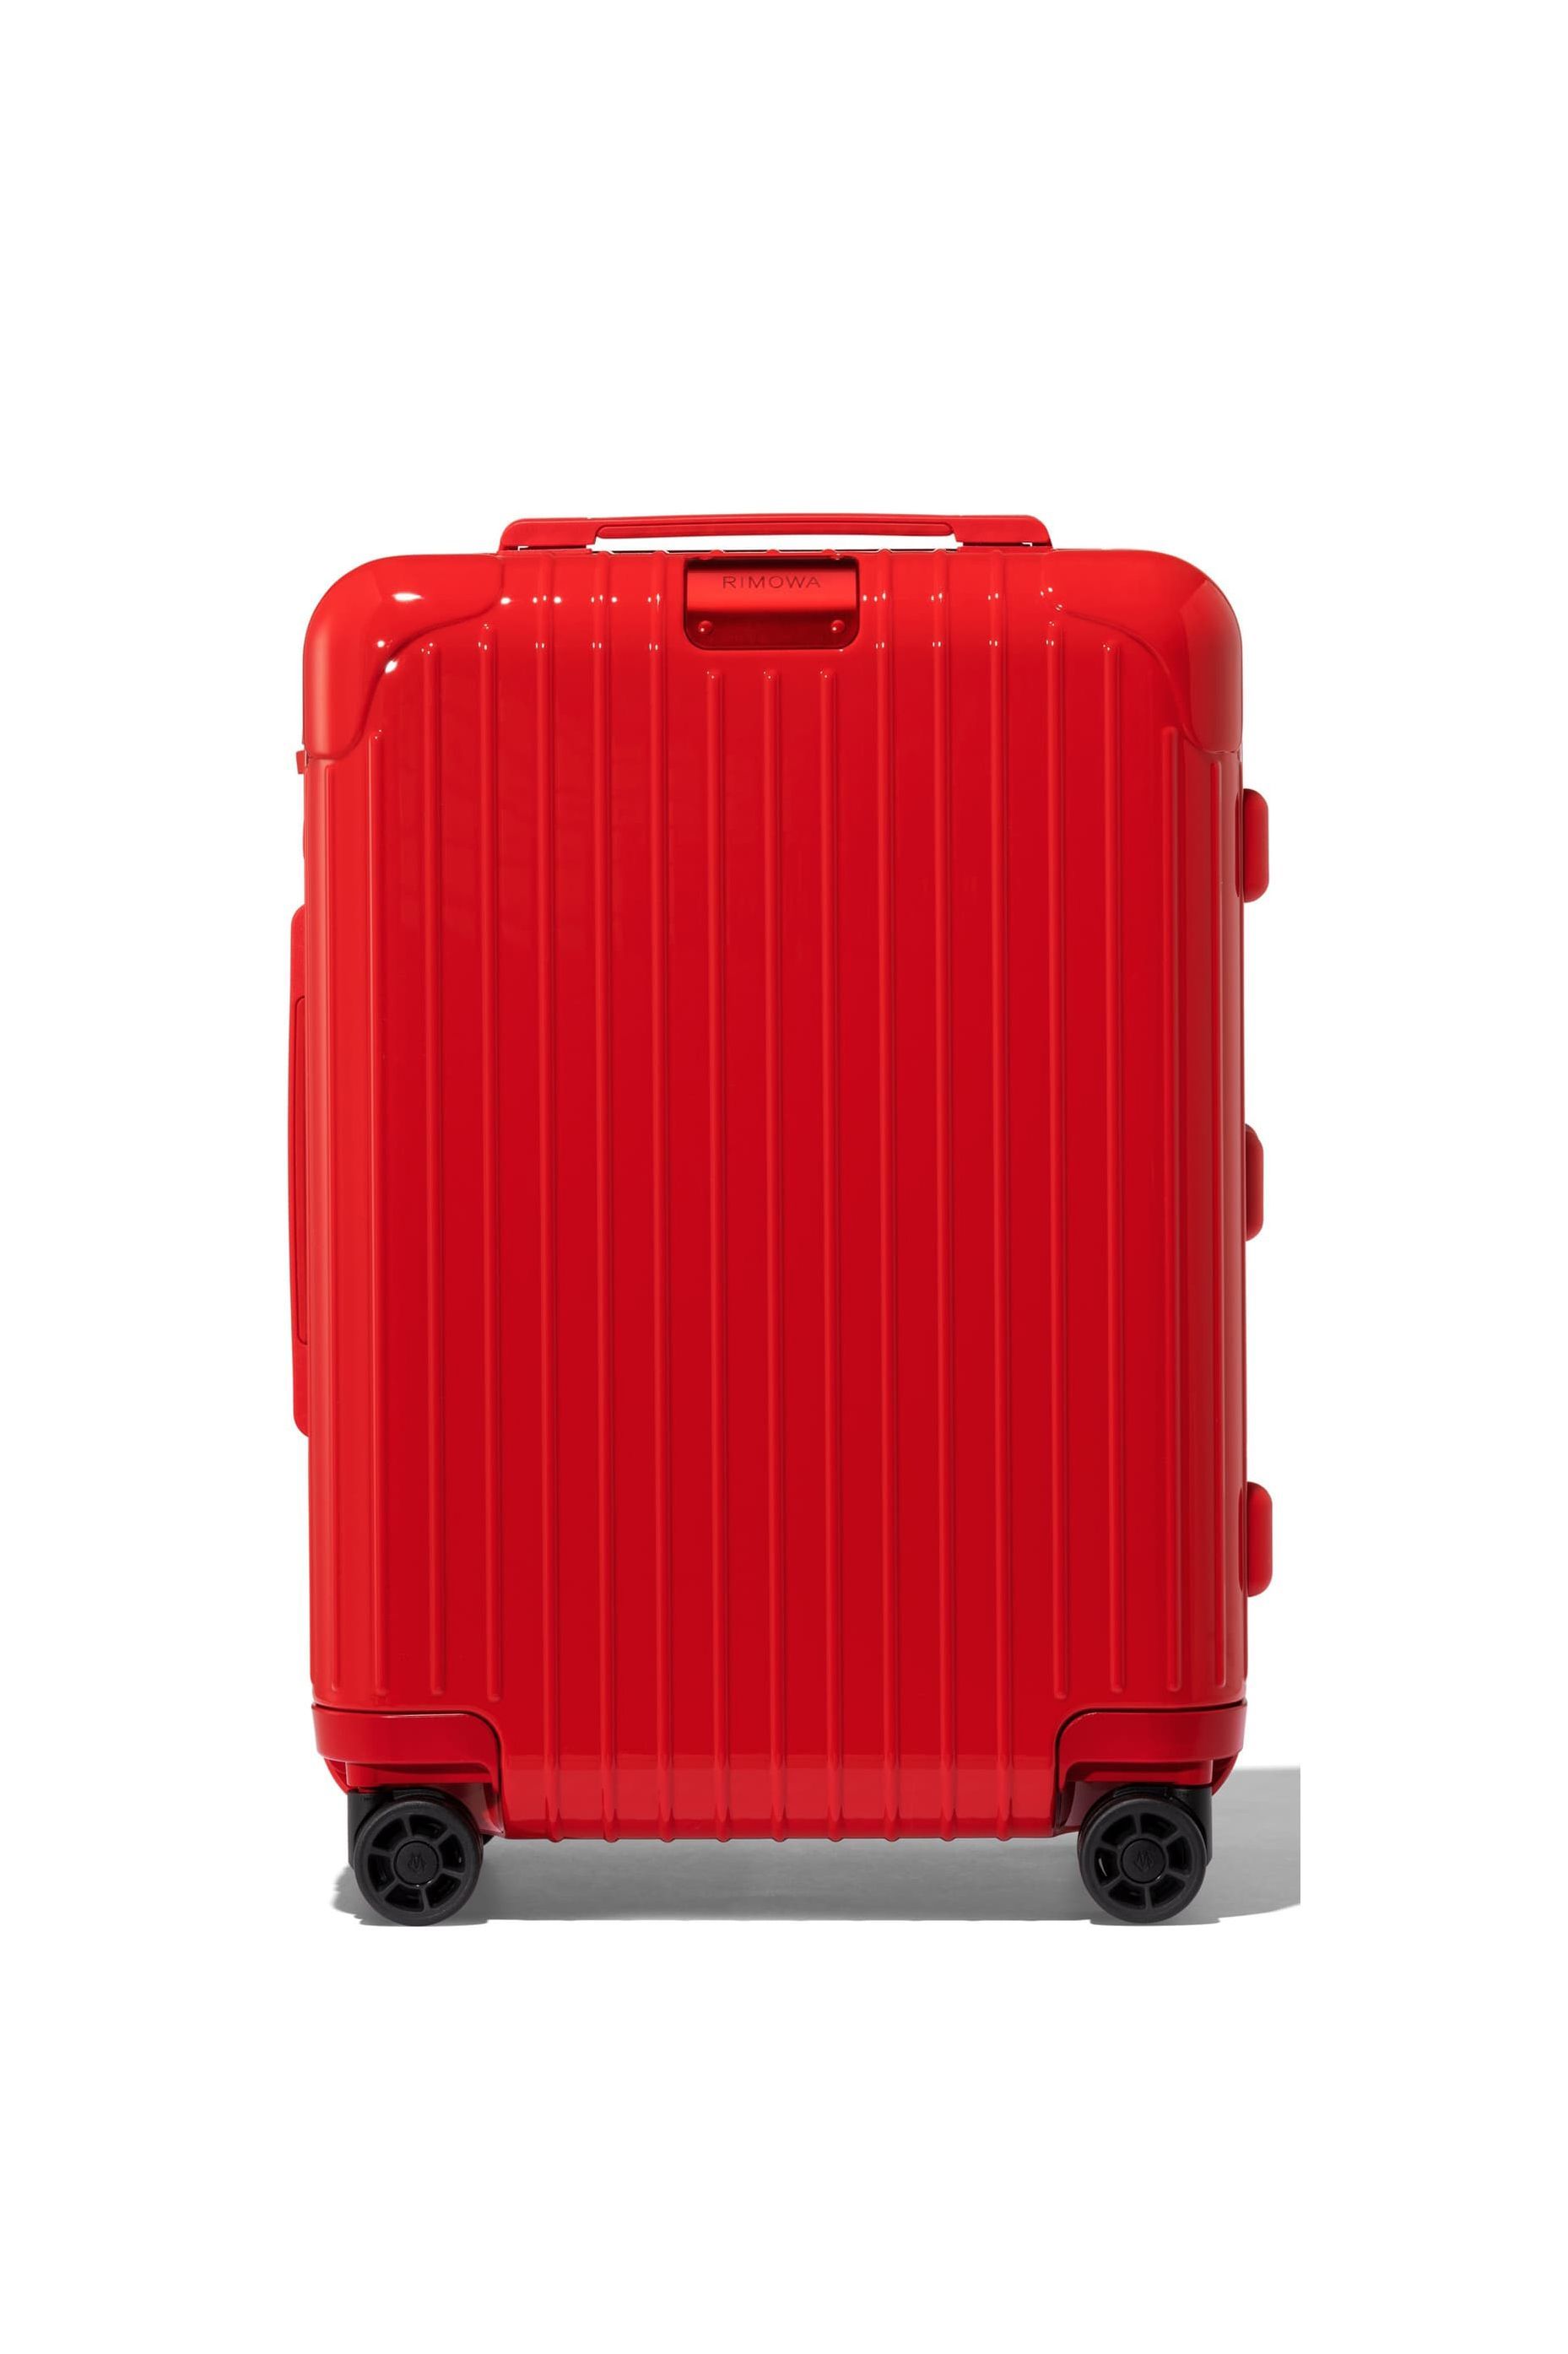 Rimowa Suitcase Review - Is Rimowa 